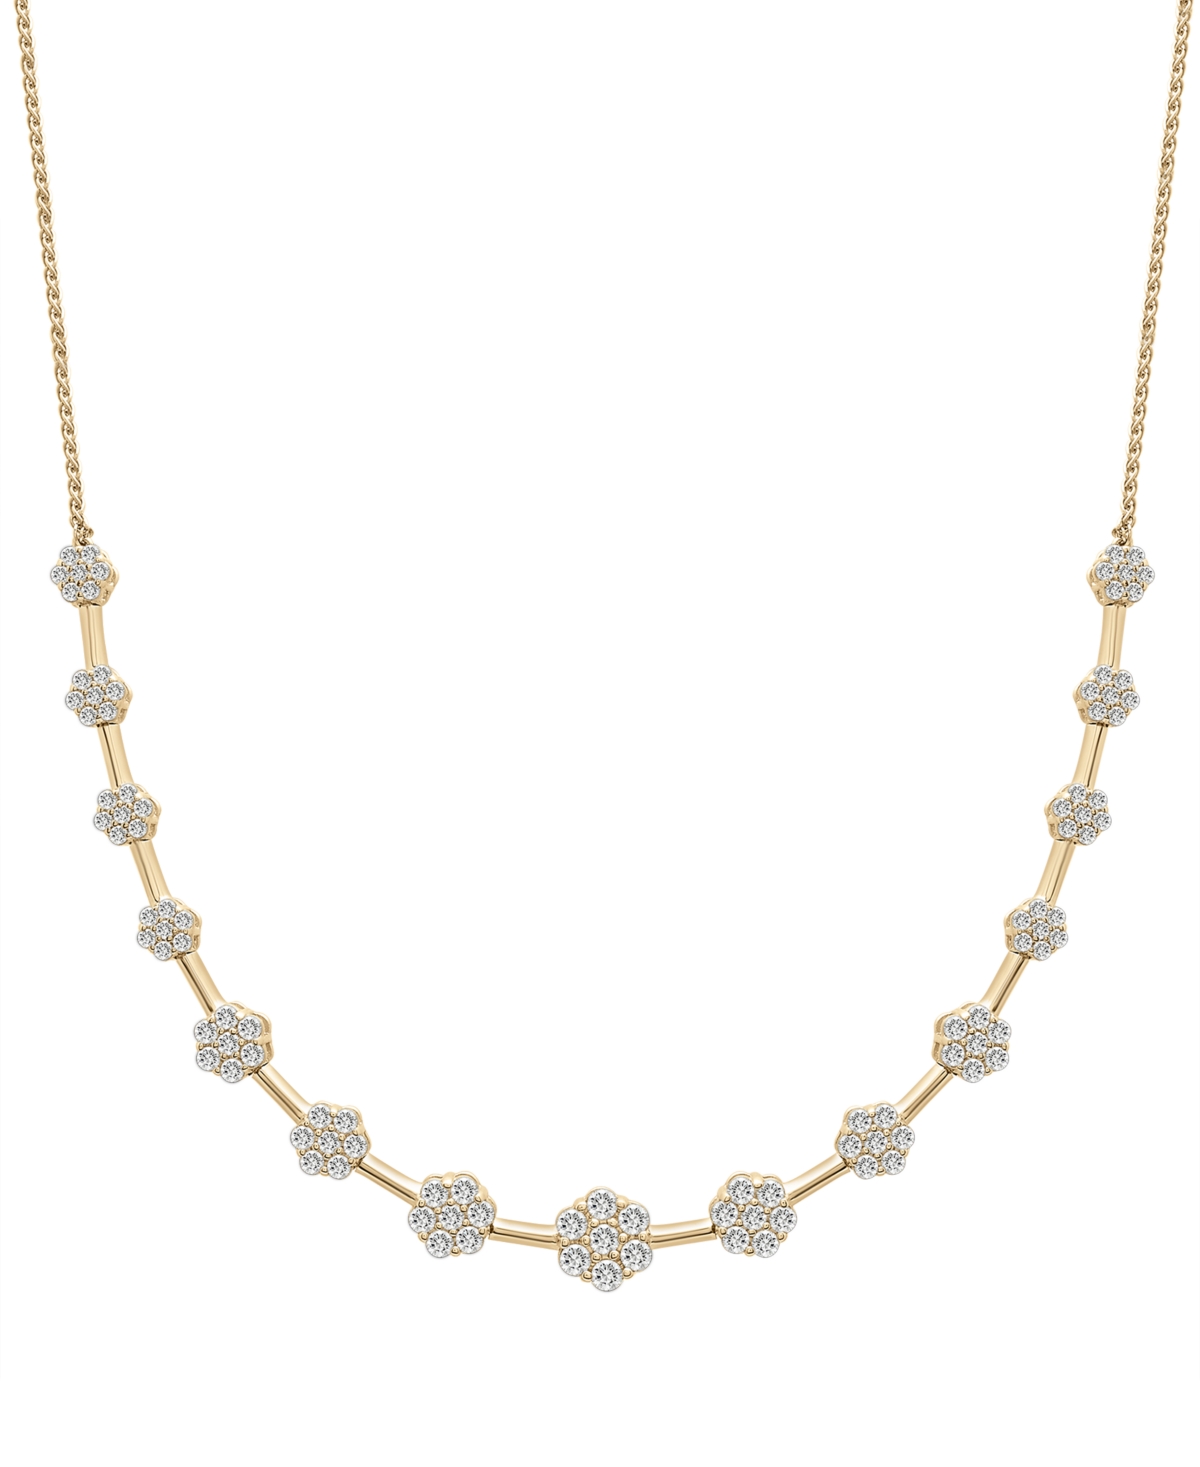 Wrapped In Love Diamond Flower Cluster Collar Necklace (2 Ct. T.w.) In 14k Gold, 16" + 2" Extender, Created For Macy In Yellow Gold